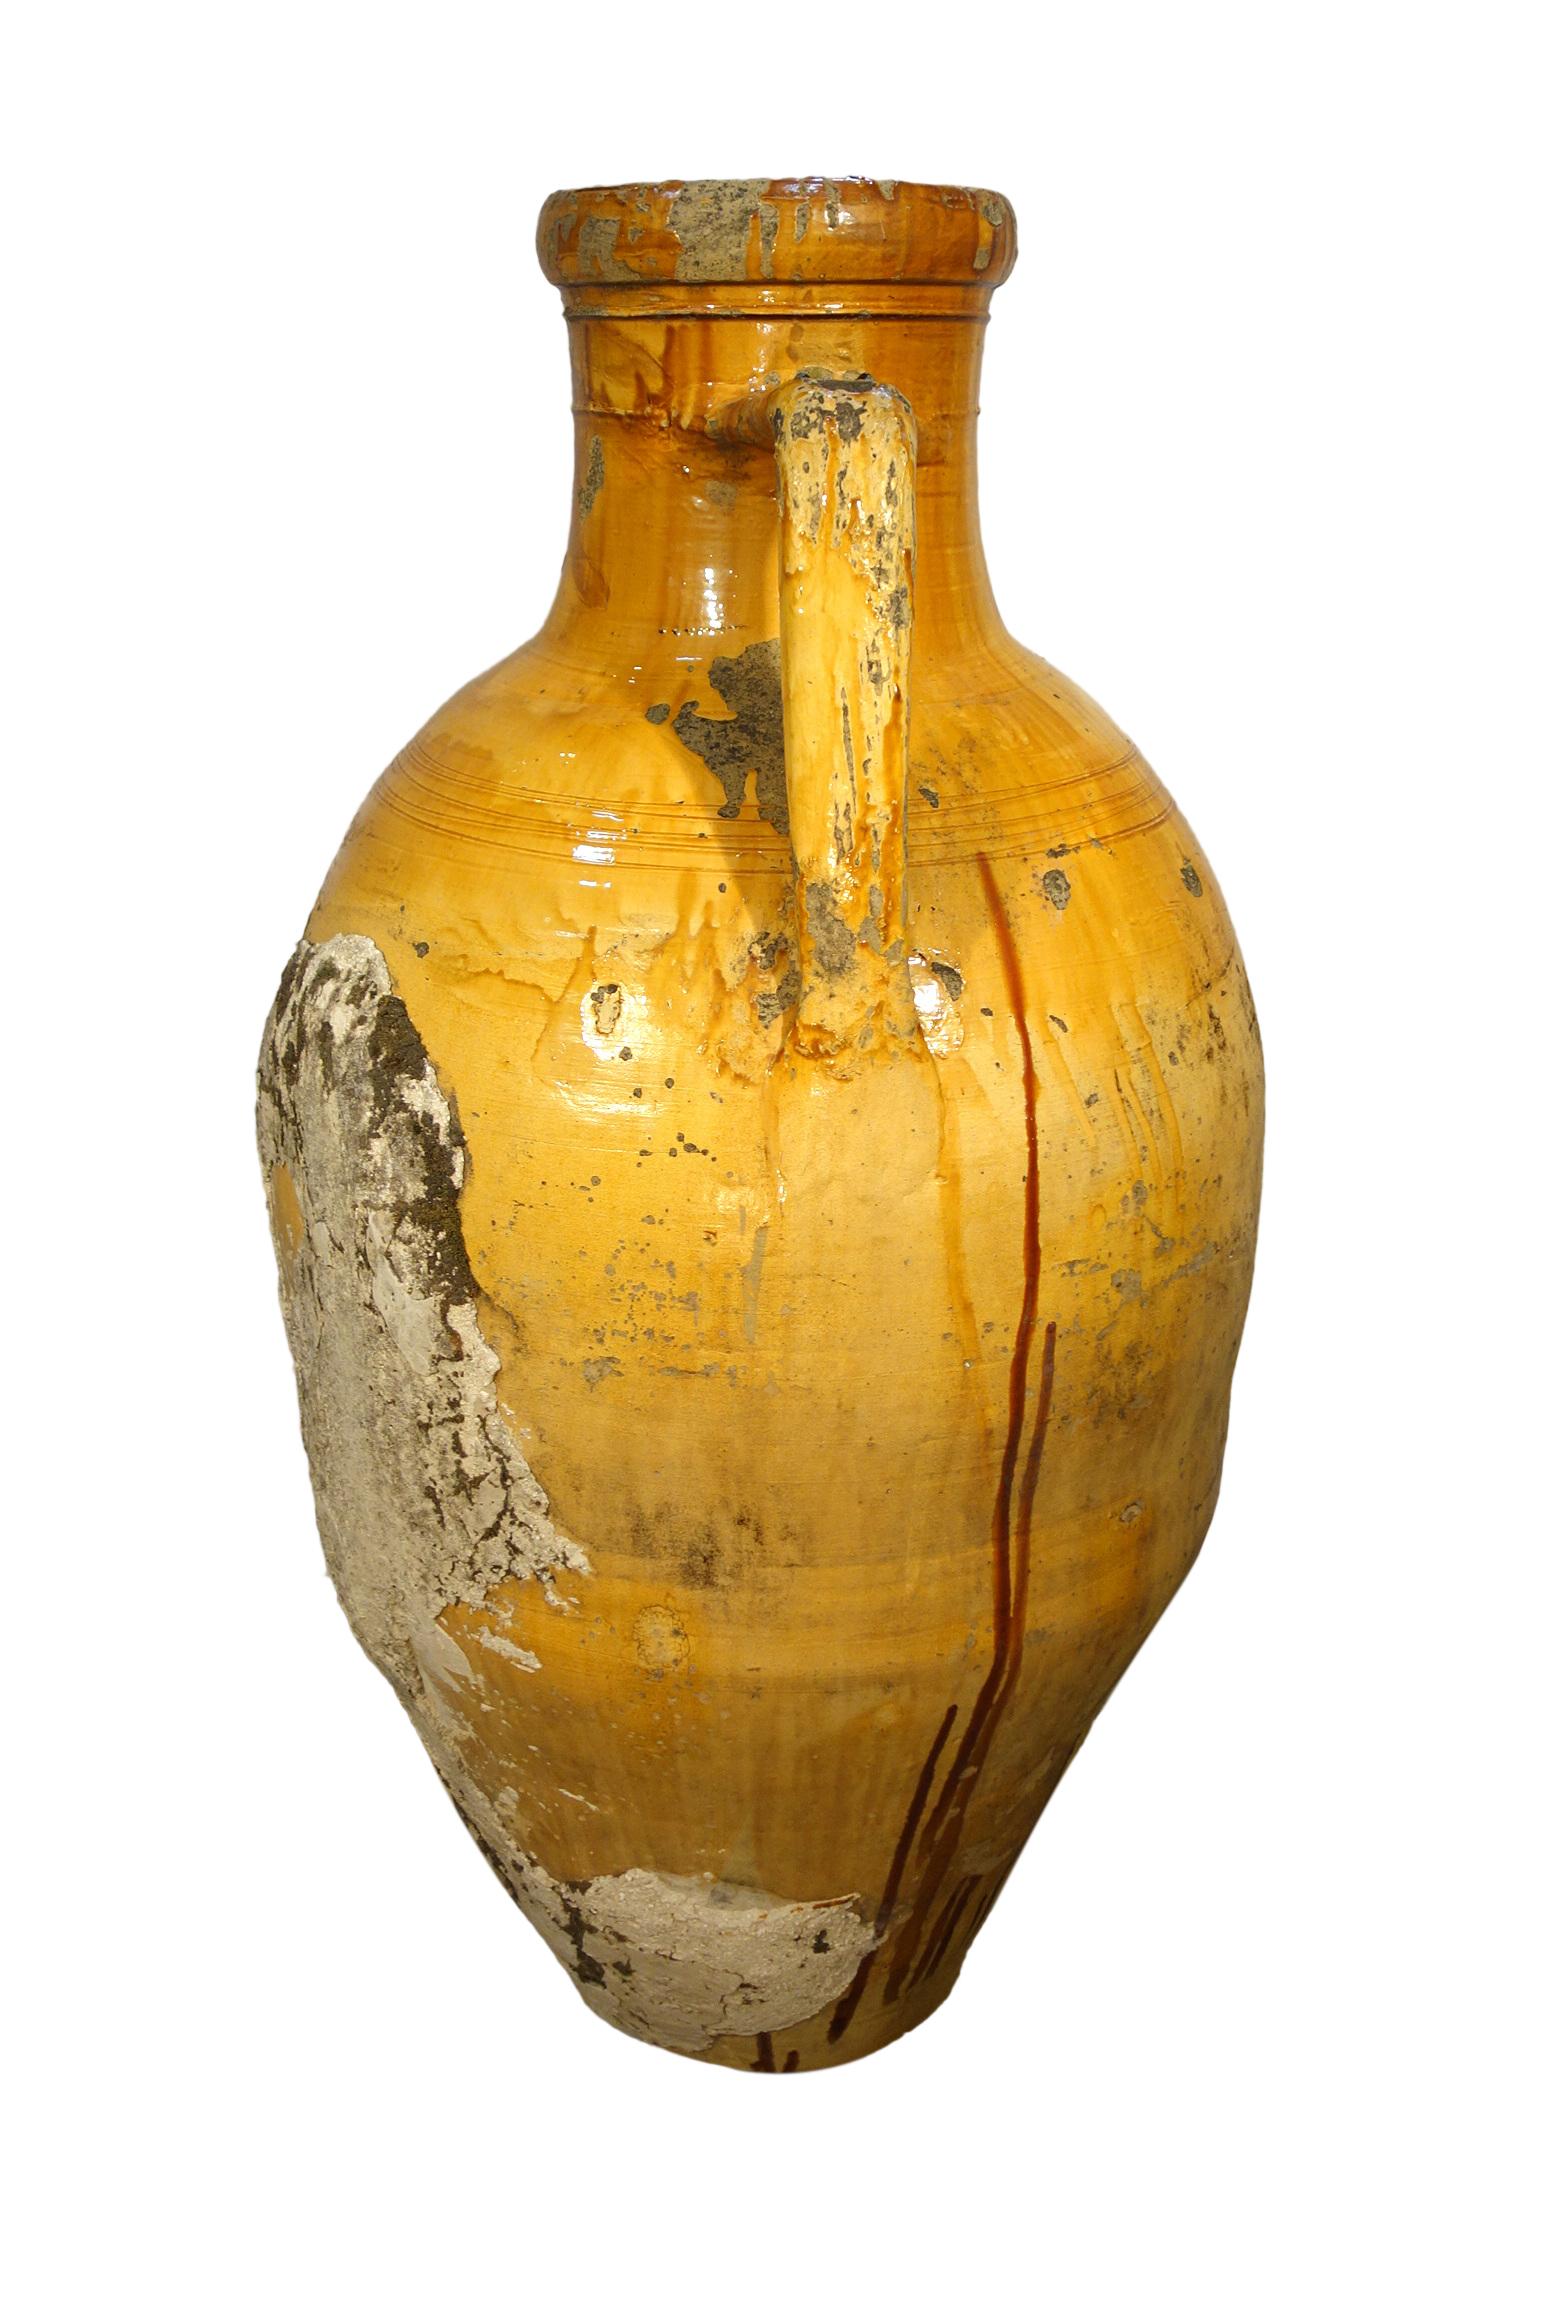 Antique Italian Orcio Puglia large terracotta vessel with bright golden ochre & umber glaze. Authentic Mediterranean antique pottery, two-handled amphora jar with lower spout from Apulia region of southern Italy. Handcrafted earthenware of